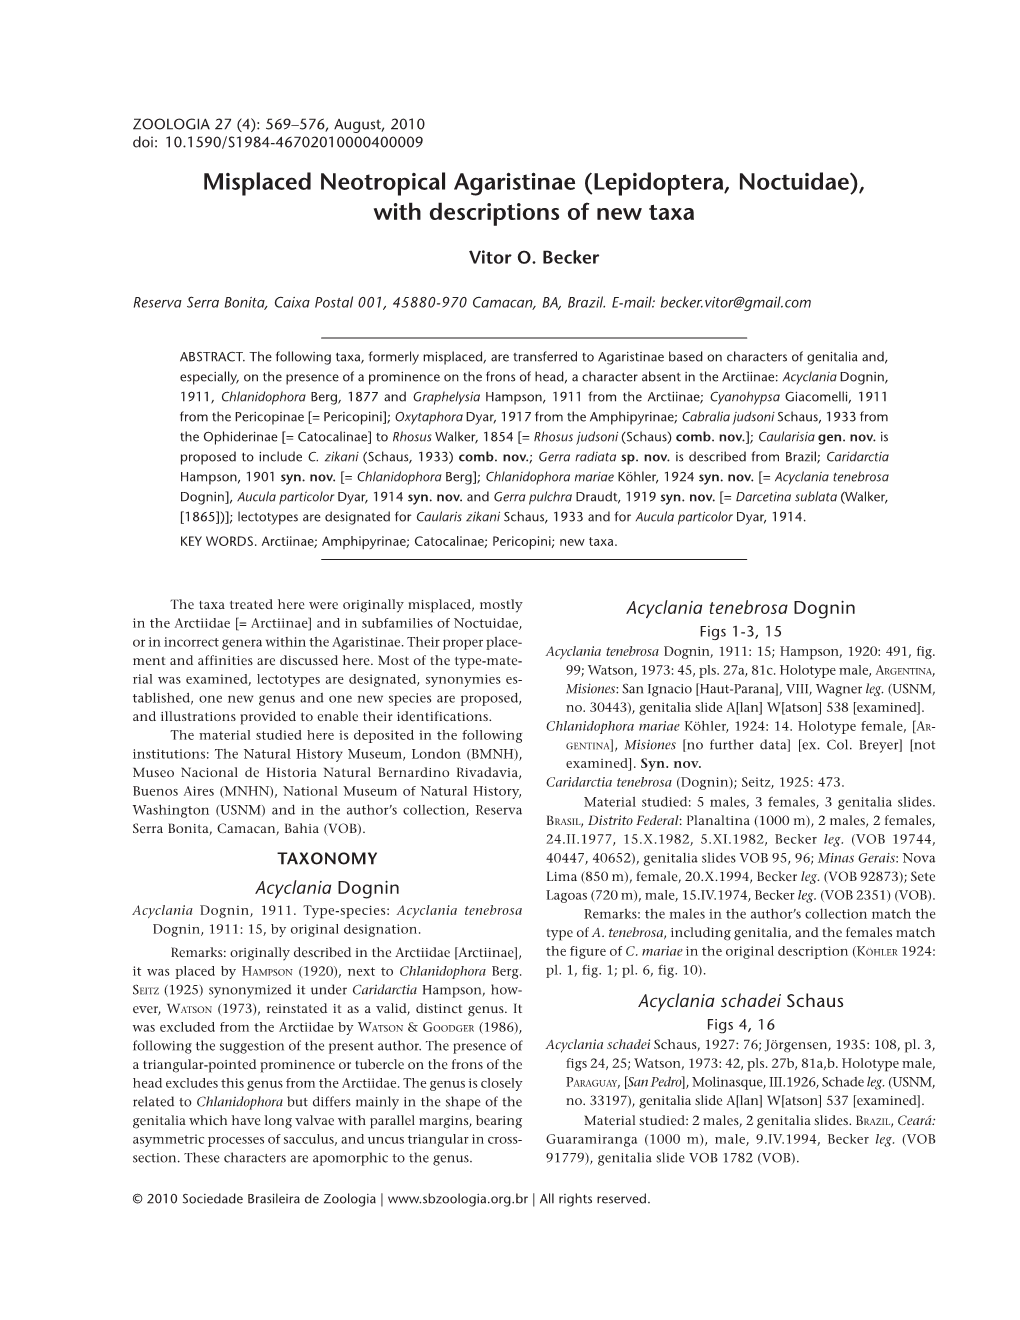 Misplaced Neotropical Agaristinae (Lepidoptera, Noctuidae), with Descriptions of New Taxa